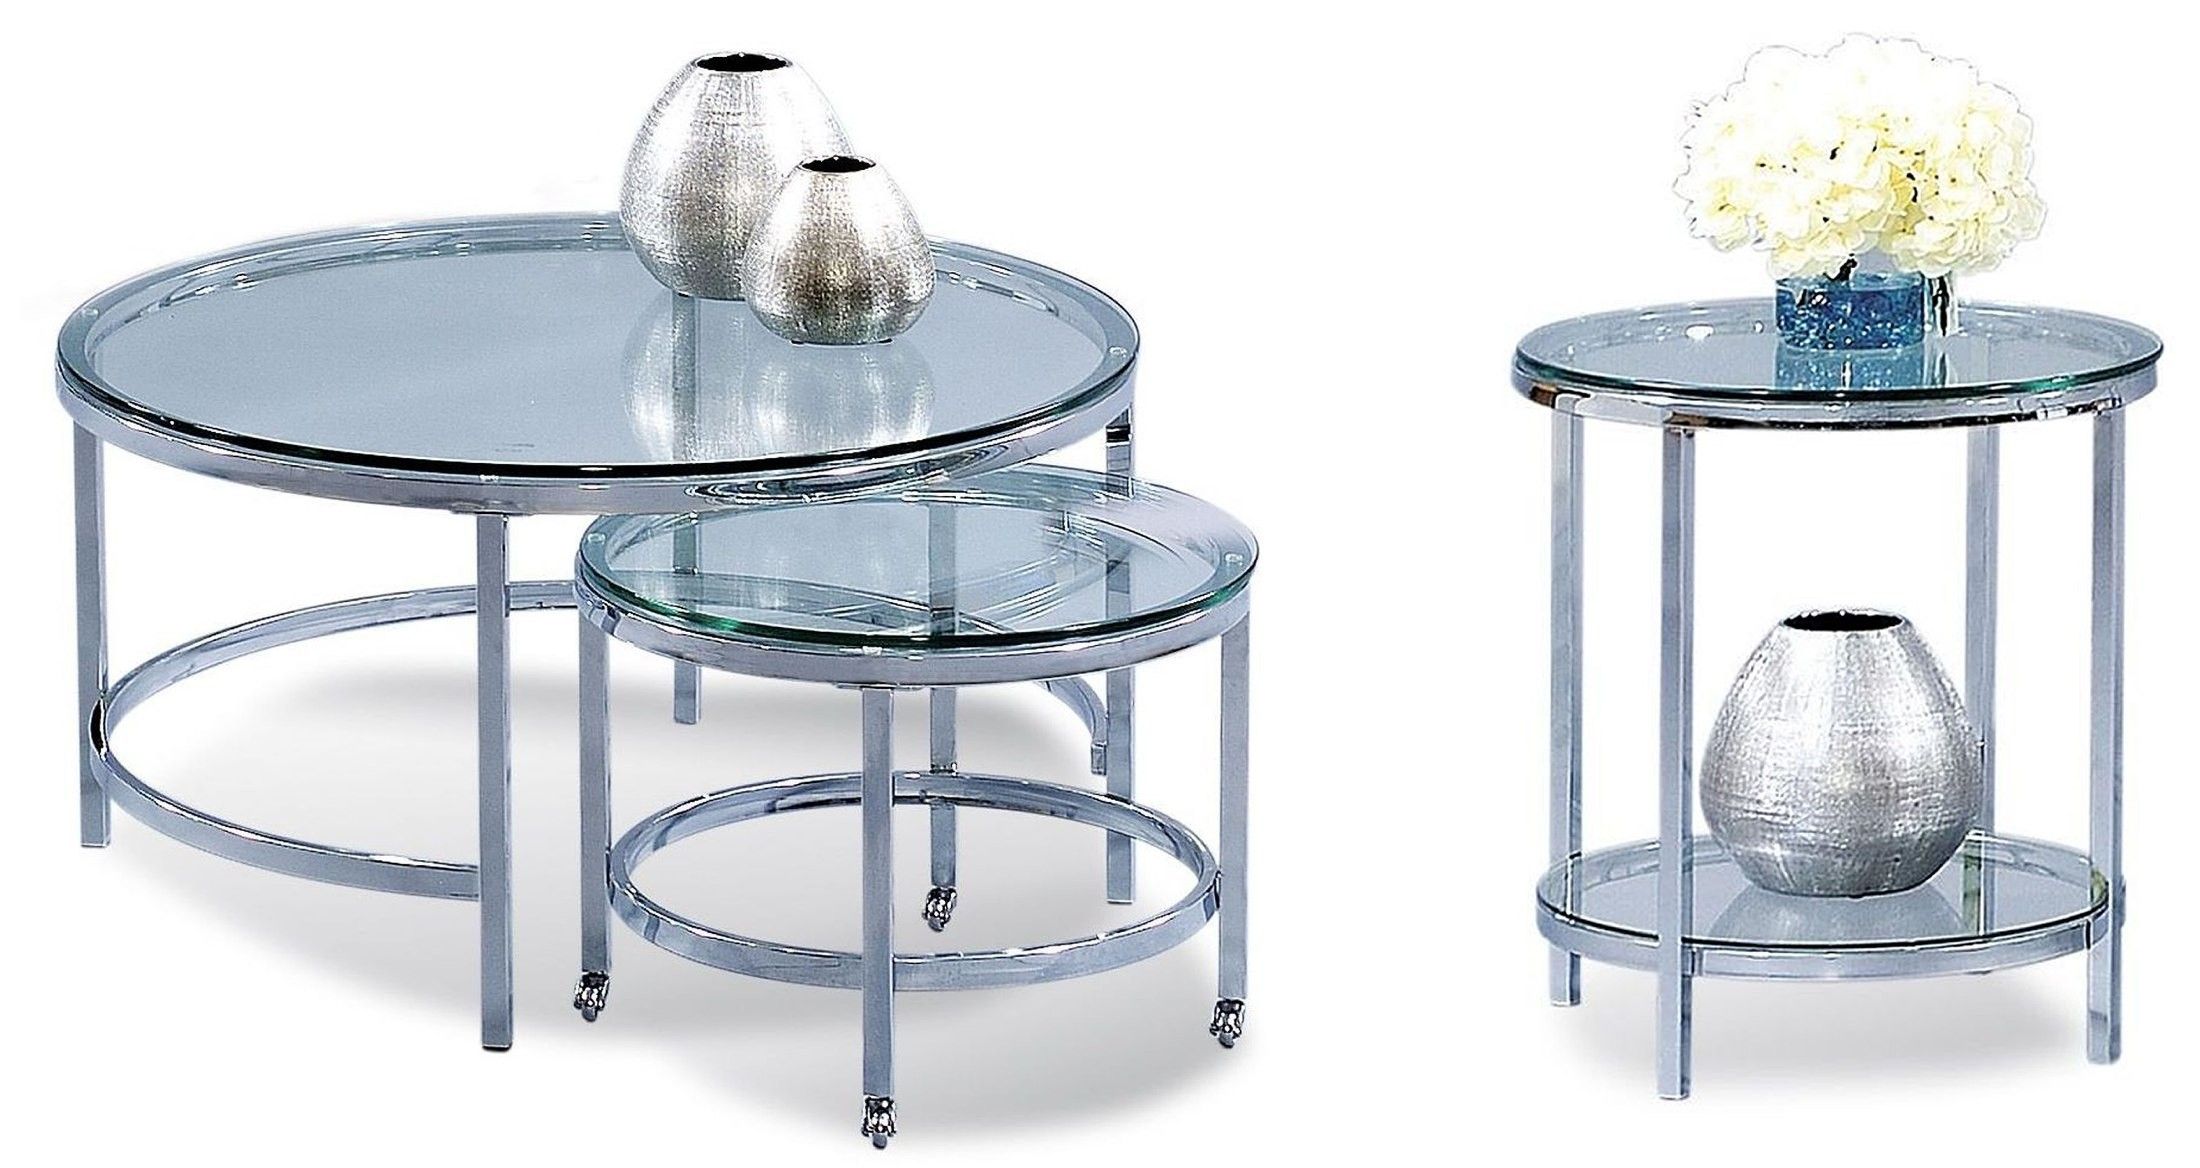 Patinoire Polished Chrome Round Cocktail Table With Casters Intended For Polished Chrome Round Console Tables (View 2 of 20)